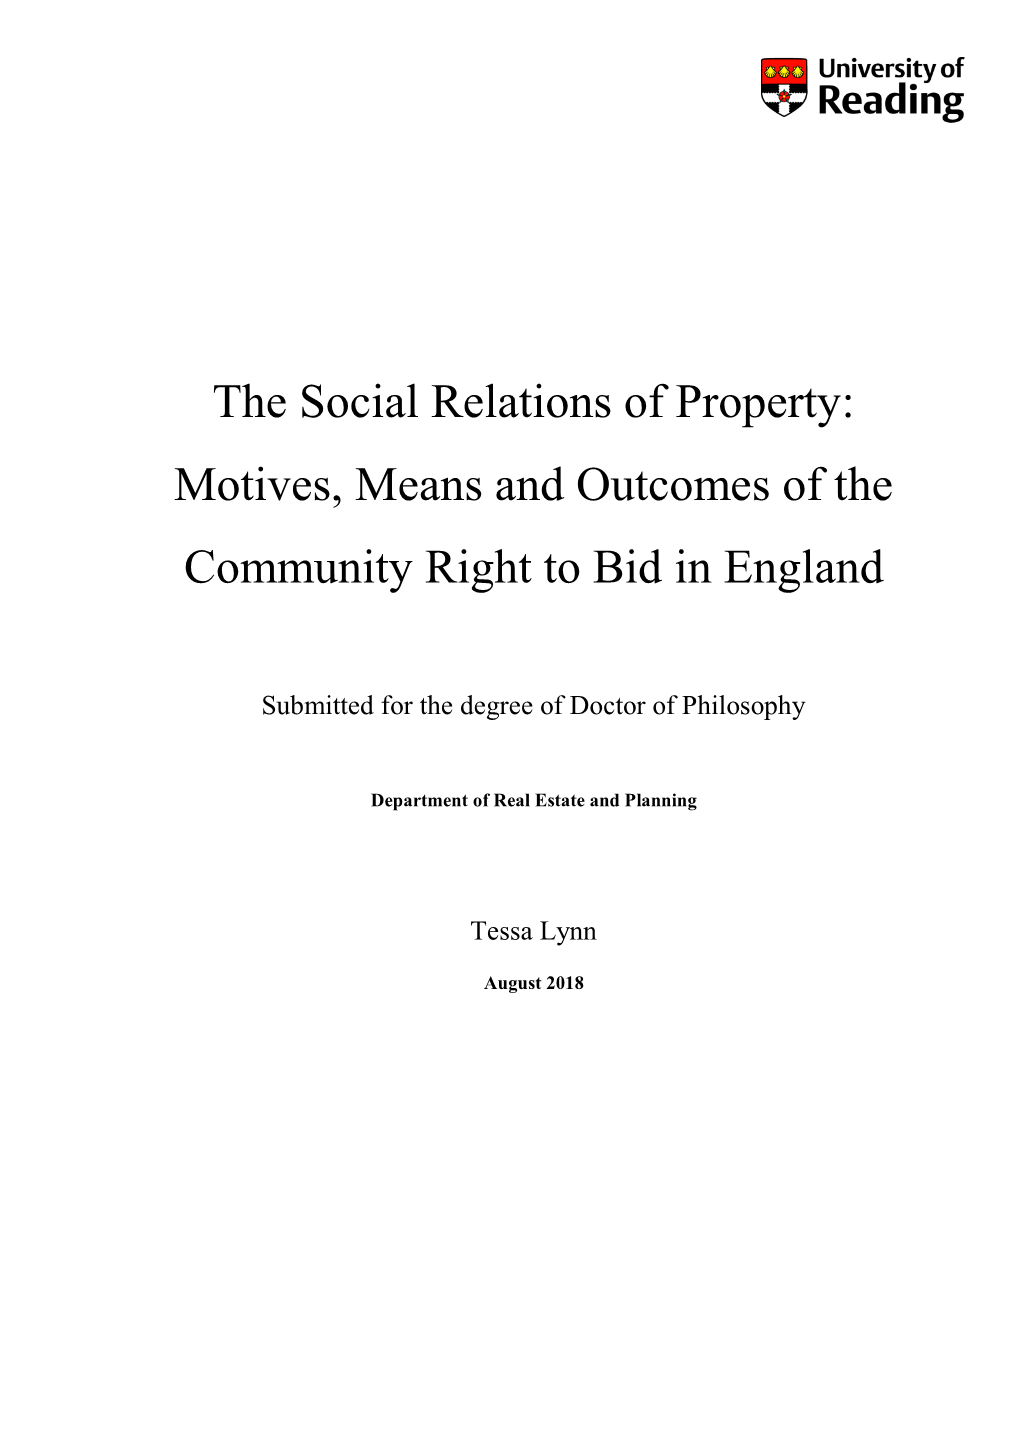 The Social Relations of Property: Motives, Means and Outcomes of the Community Right to Bid in England